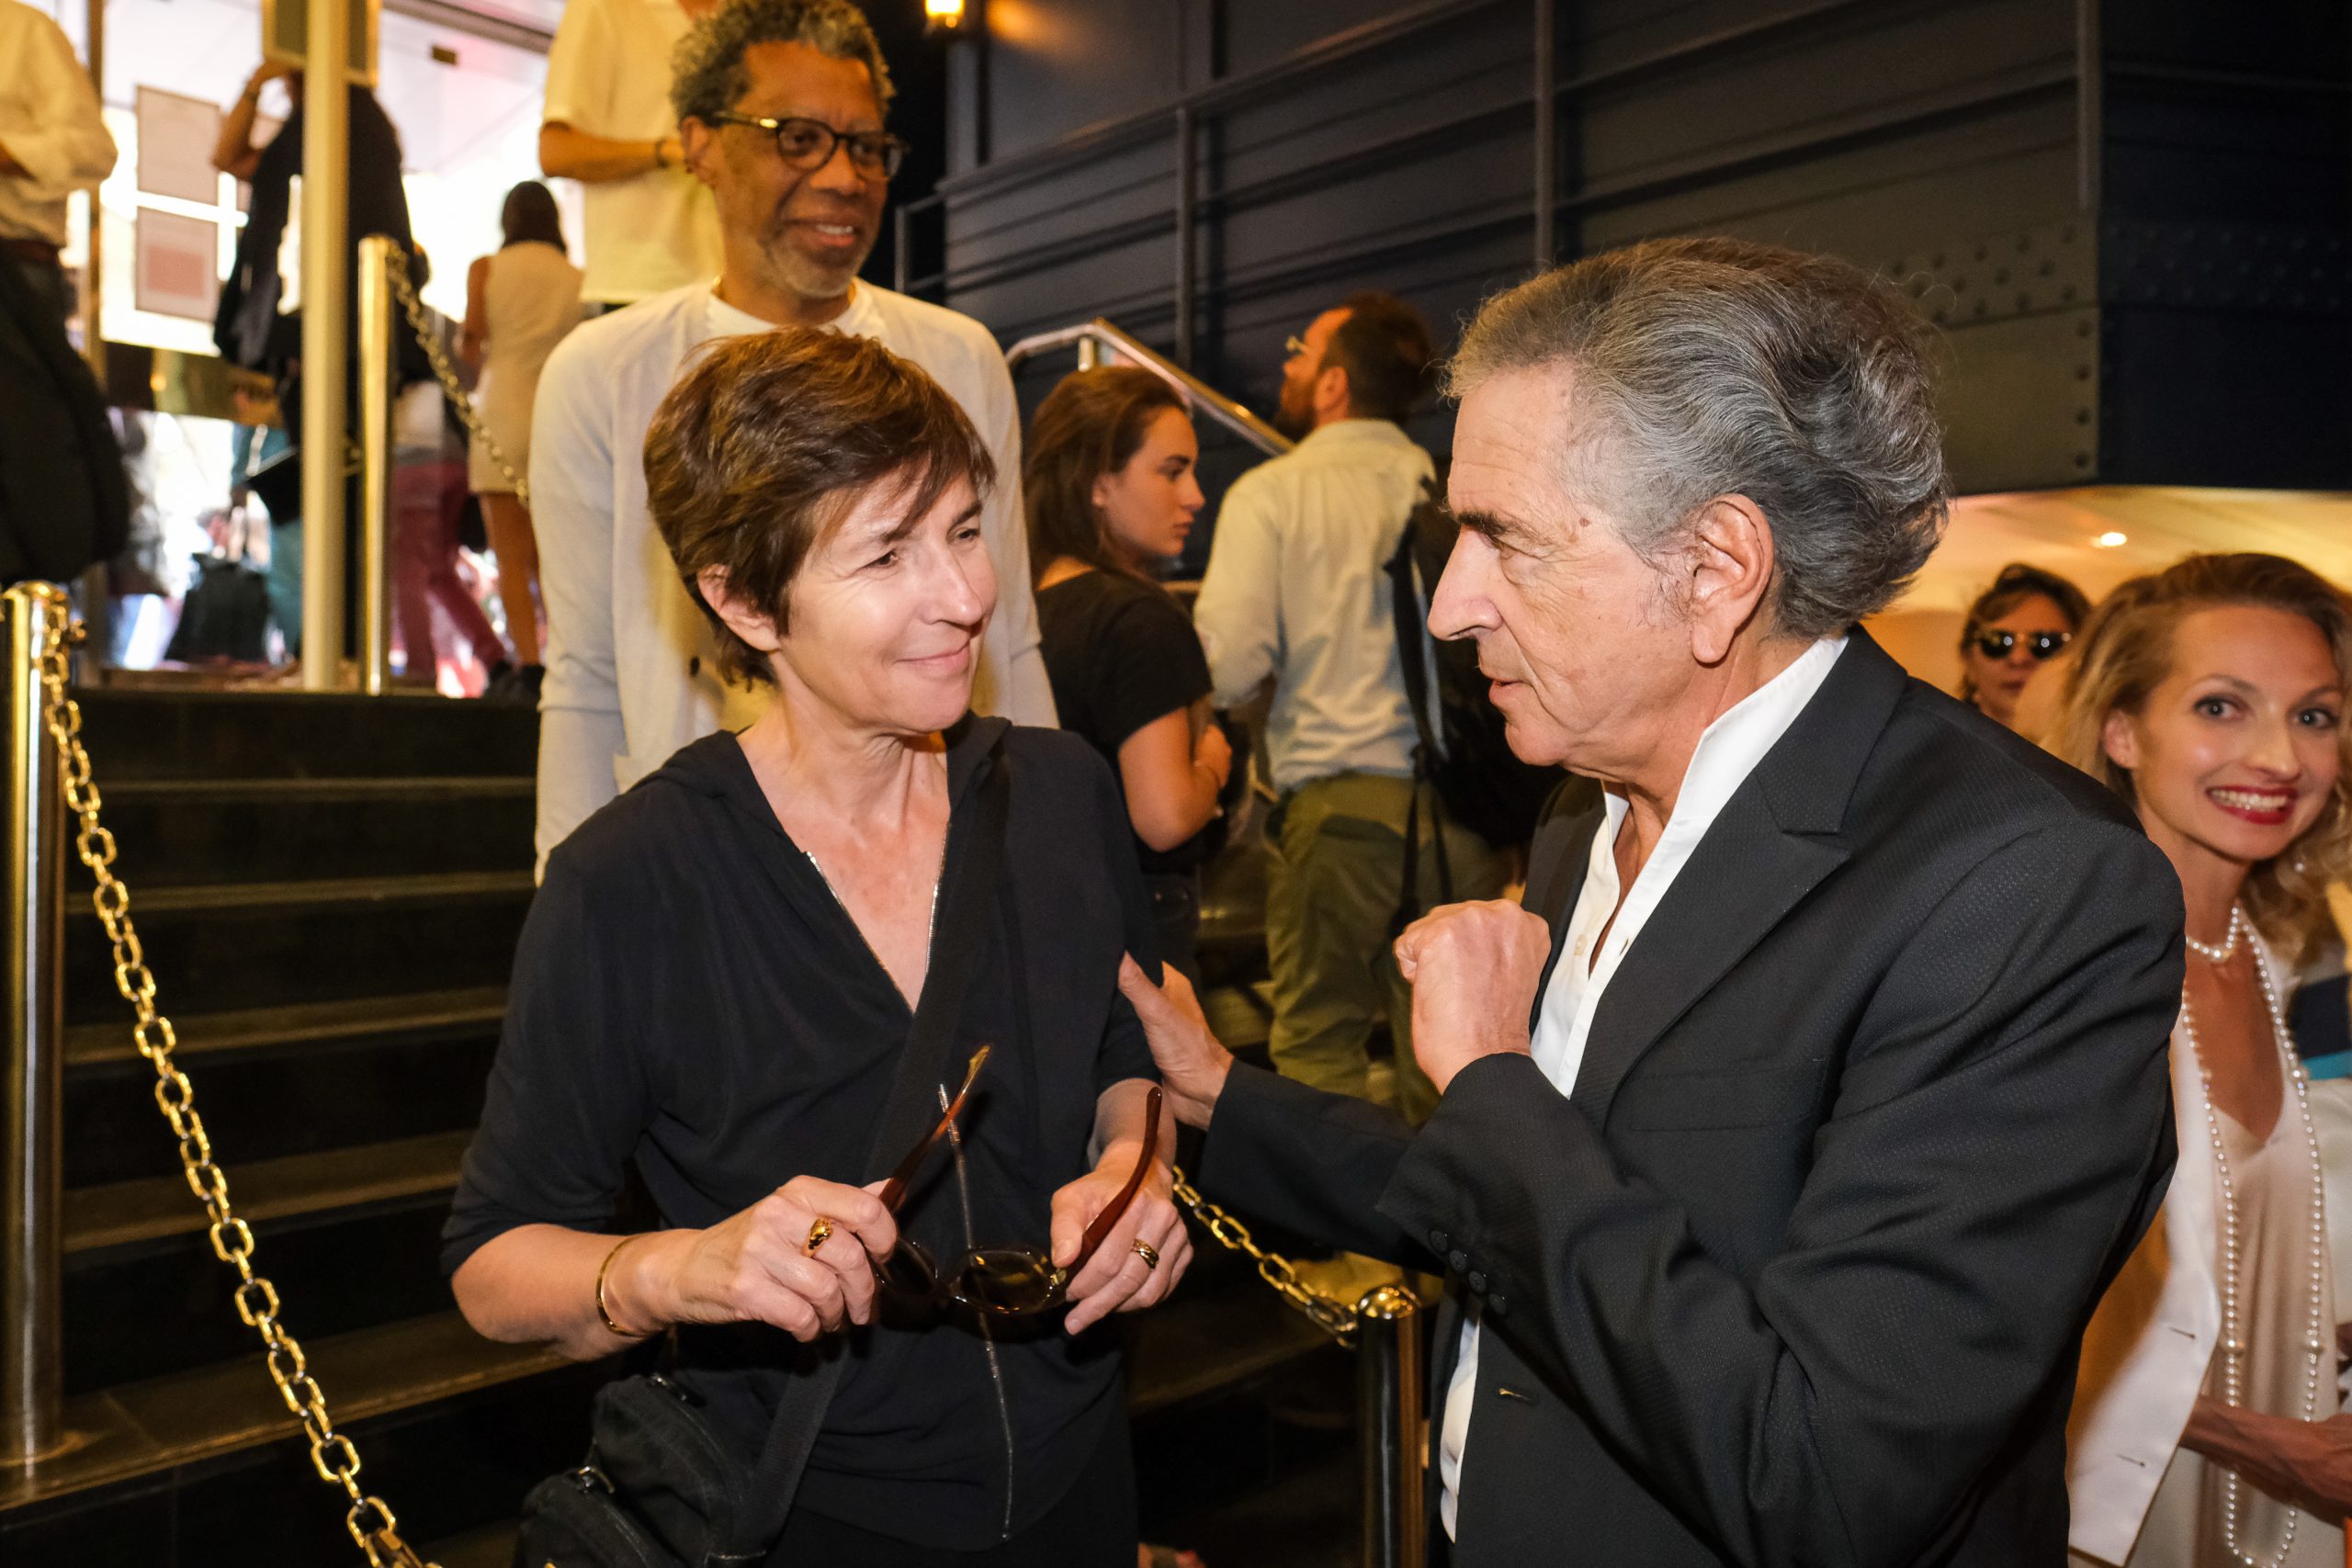 Bernard-Henri Lévy and Christine Angot at the preview of BHL's film "Why Ukraine", at the Cinema Le Balzac in Paris.